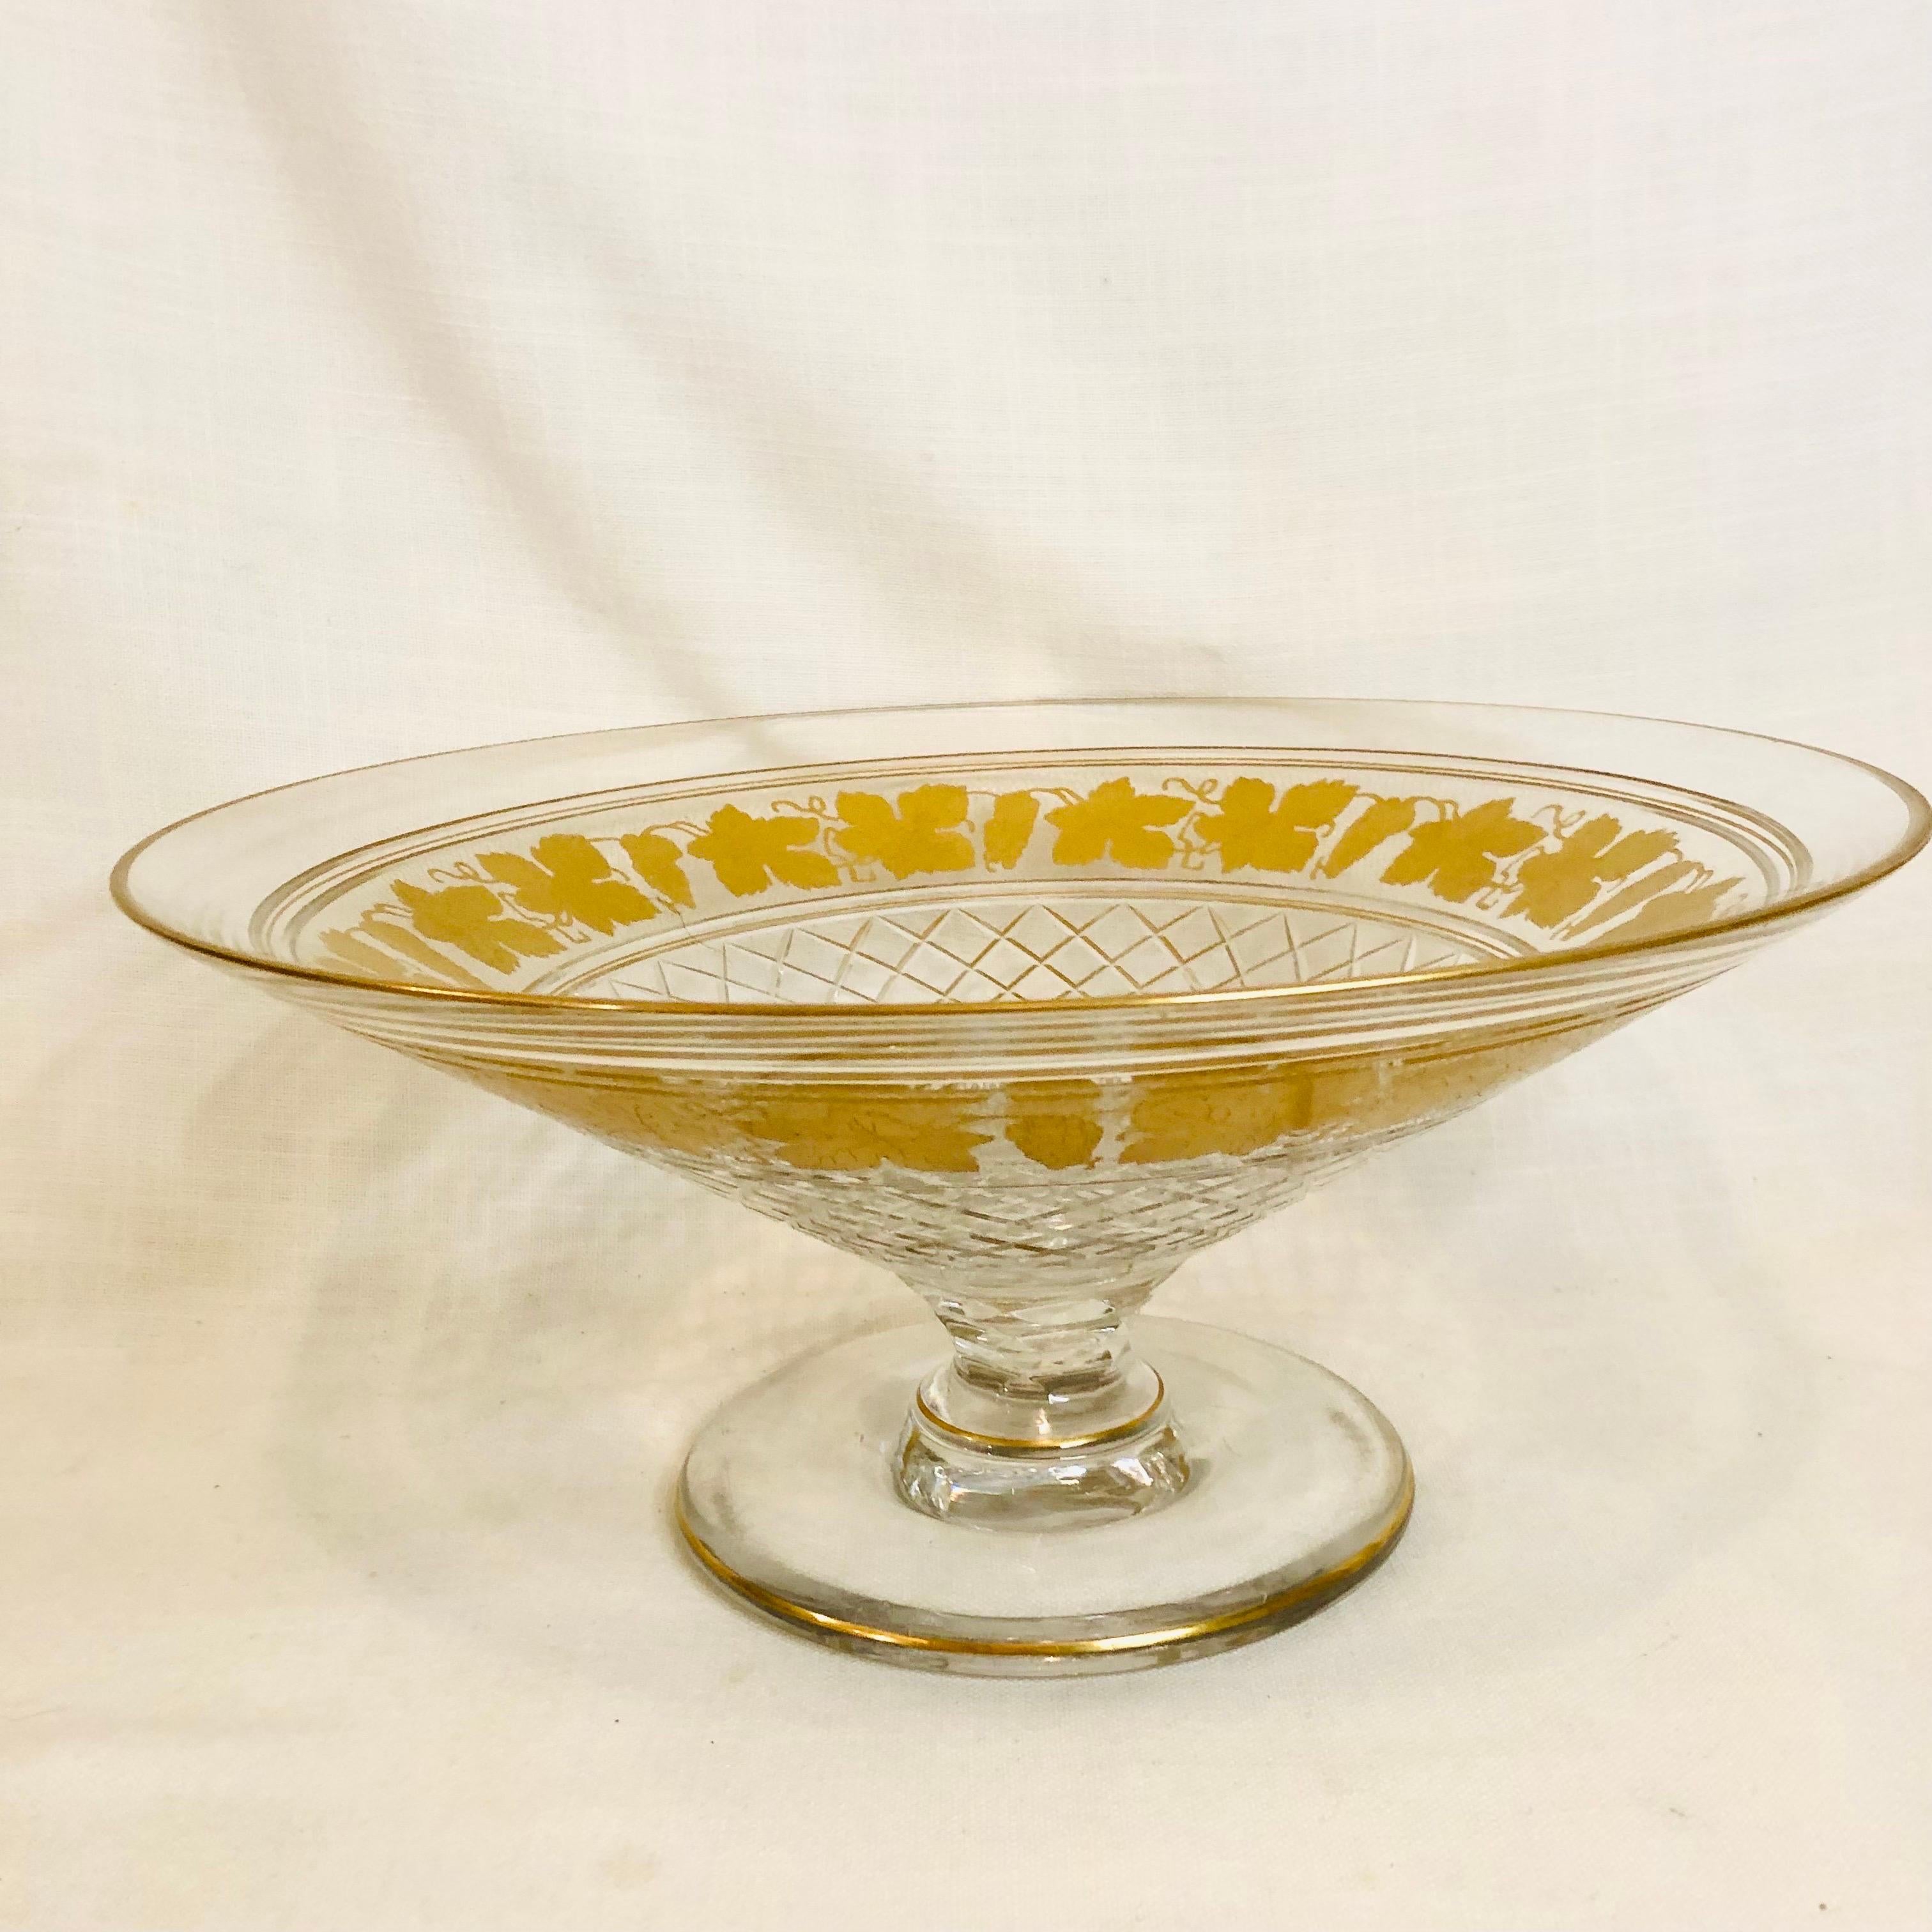 This is an absolutely fabulous and stunning Val Saint Lambert cut crystal center bowl with gilded decoration of grapes and grape leaves. This large bowl is formed on a raised beautifully cut base. This bowl is 13.88 inches in diameter. This would be